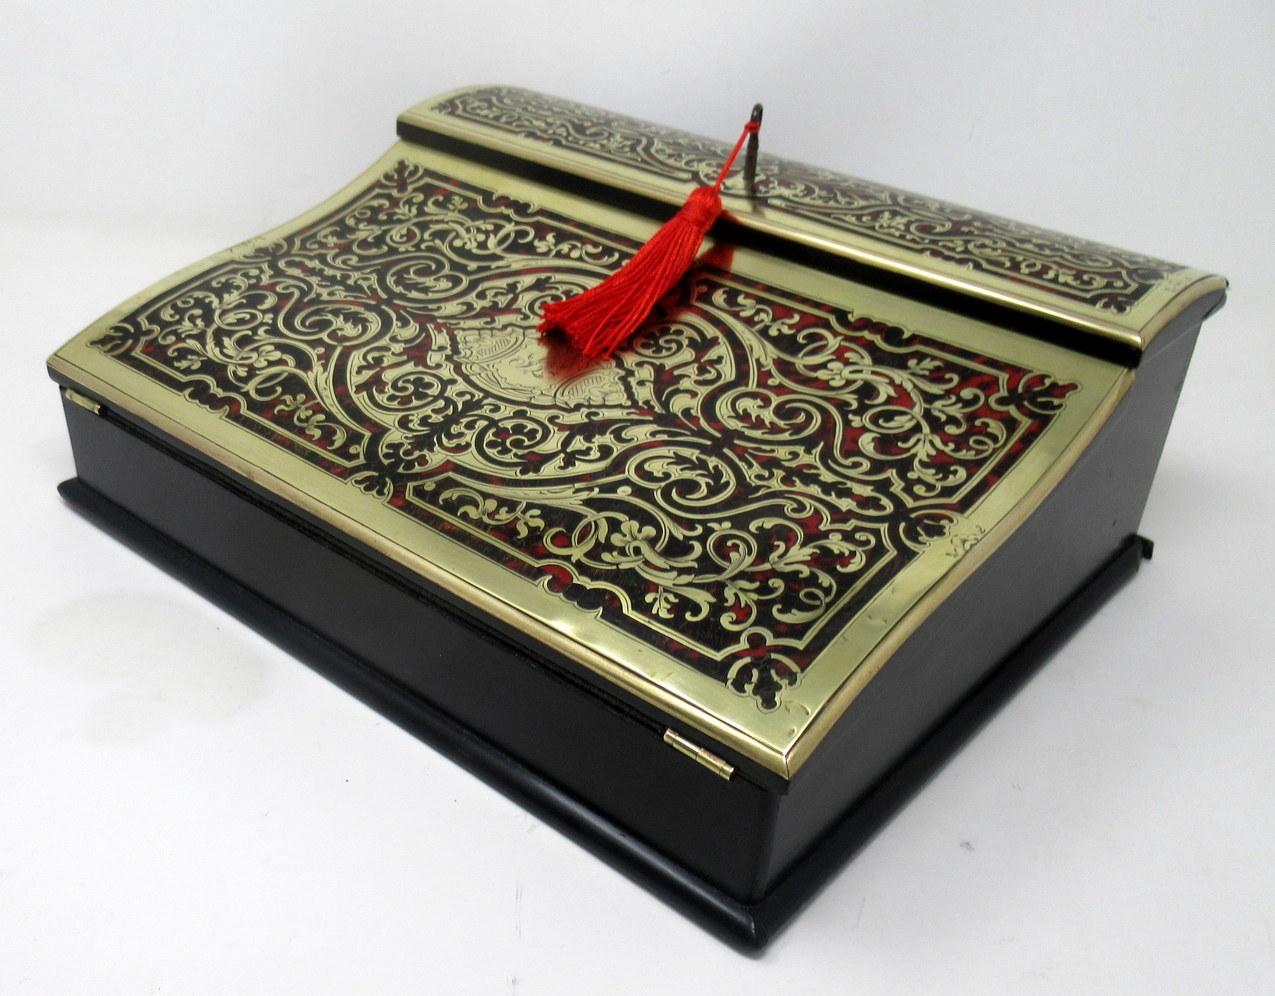 An exceptionally fine quality example of a polished brass inlaid travelling writing slope made during the third quarter of the 19th century, of French origin. 

The entire top area decorated with premier and contra-partie inlaid scrolling arabesques